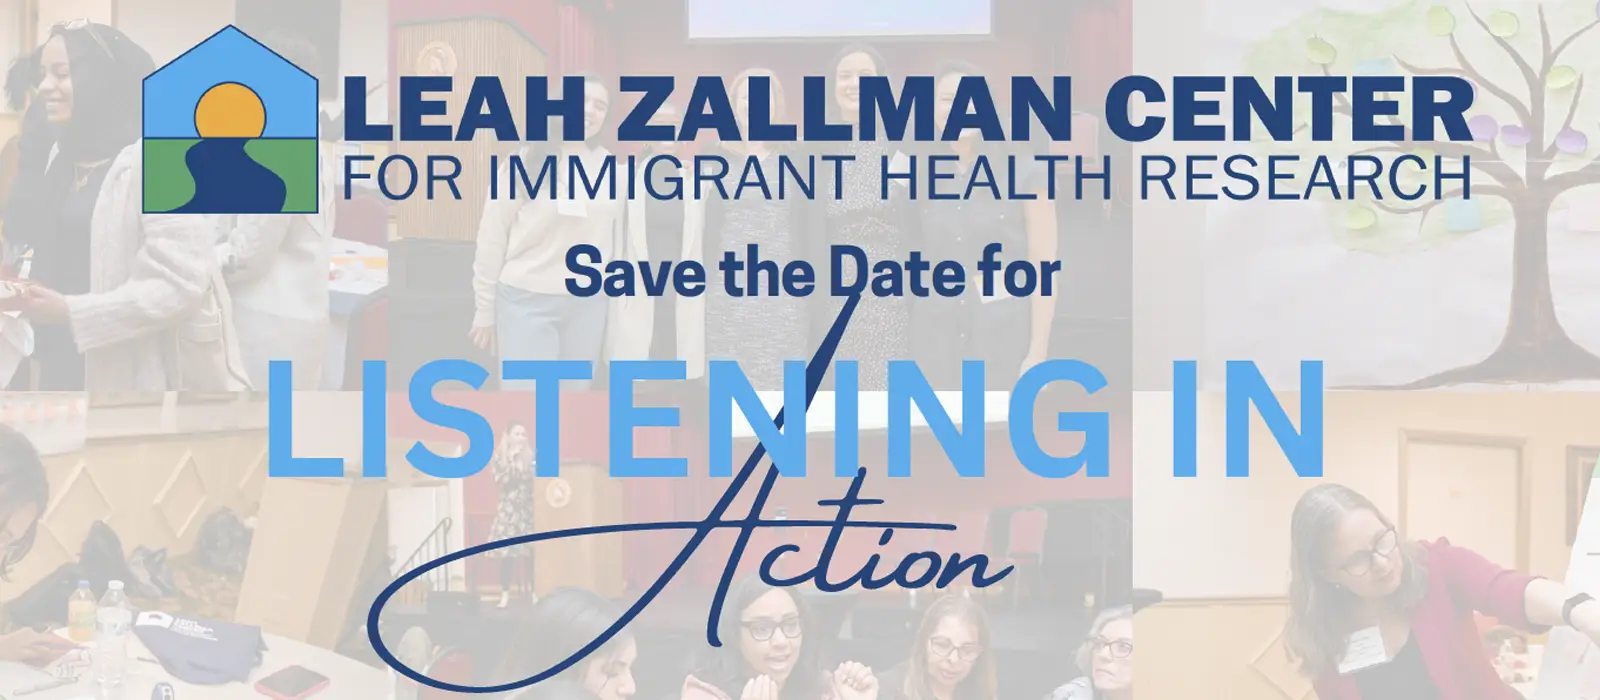 Leah Zallman Center for Immigrant Health Research: Listening in Action